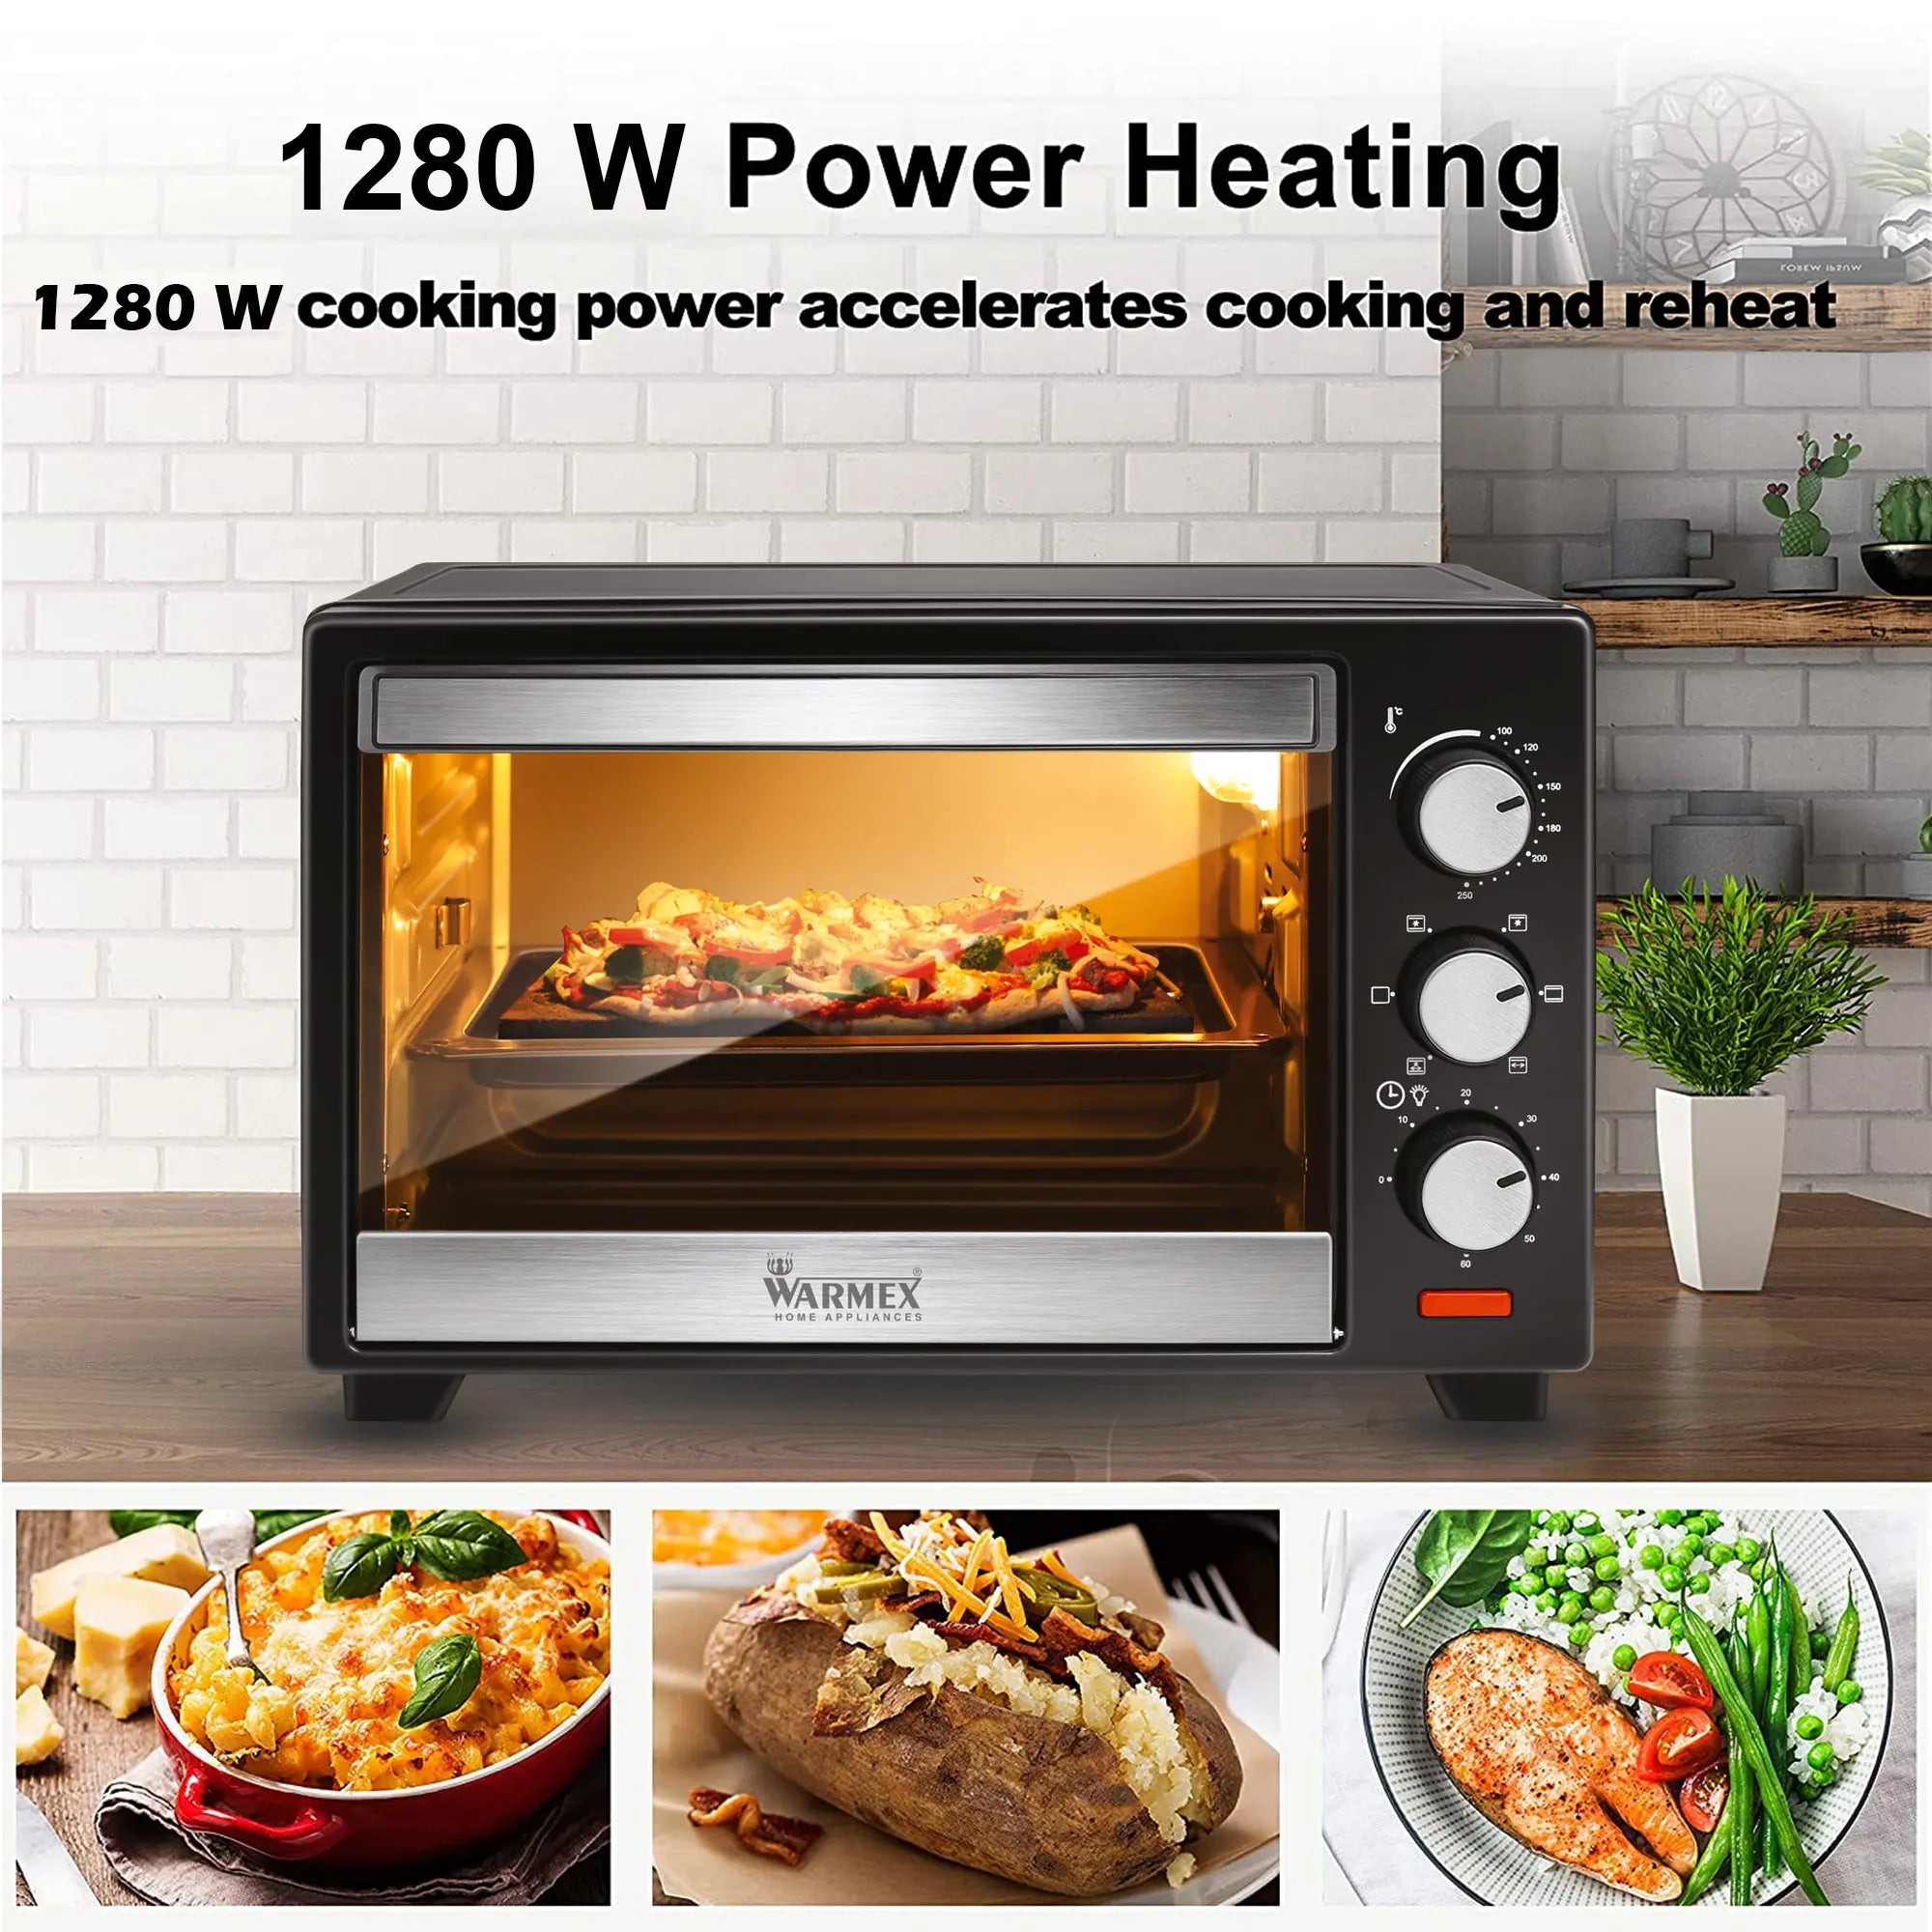 Warmex Oven Toaster Griller, Bake, Broil, Toast, Convection, Rotisserie, Keep Warm, Glass Door Window, Variable Heating Mode & 60 Minutes Timer With Auto Shut Off and Ready Bell with 20 Liter Capacity – MB20L/R&C (Black, 1280 Watts)… warmexhomeappliances2